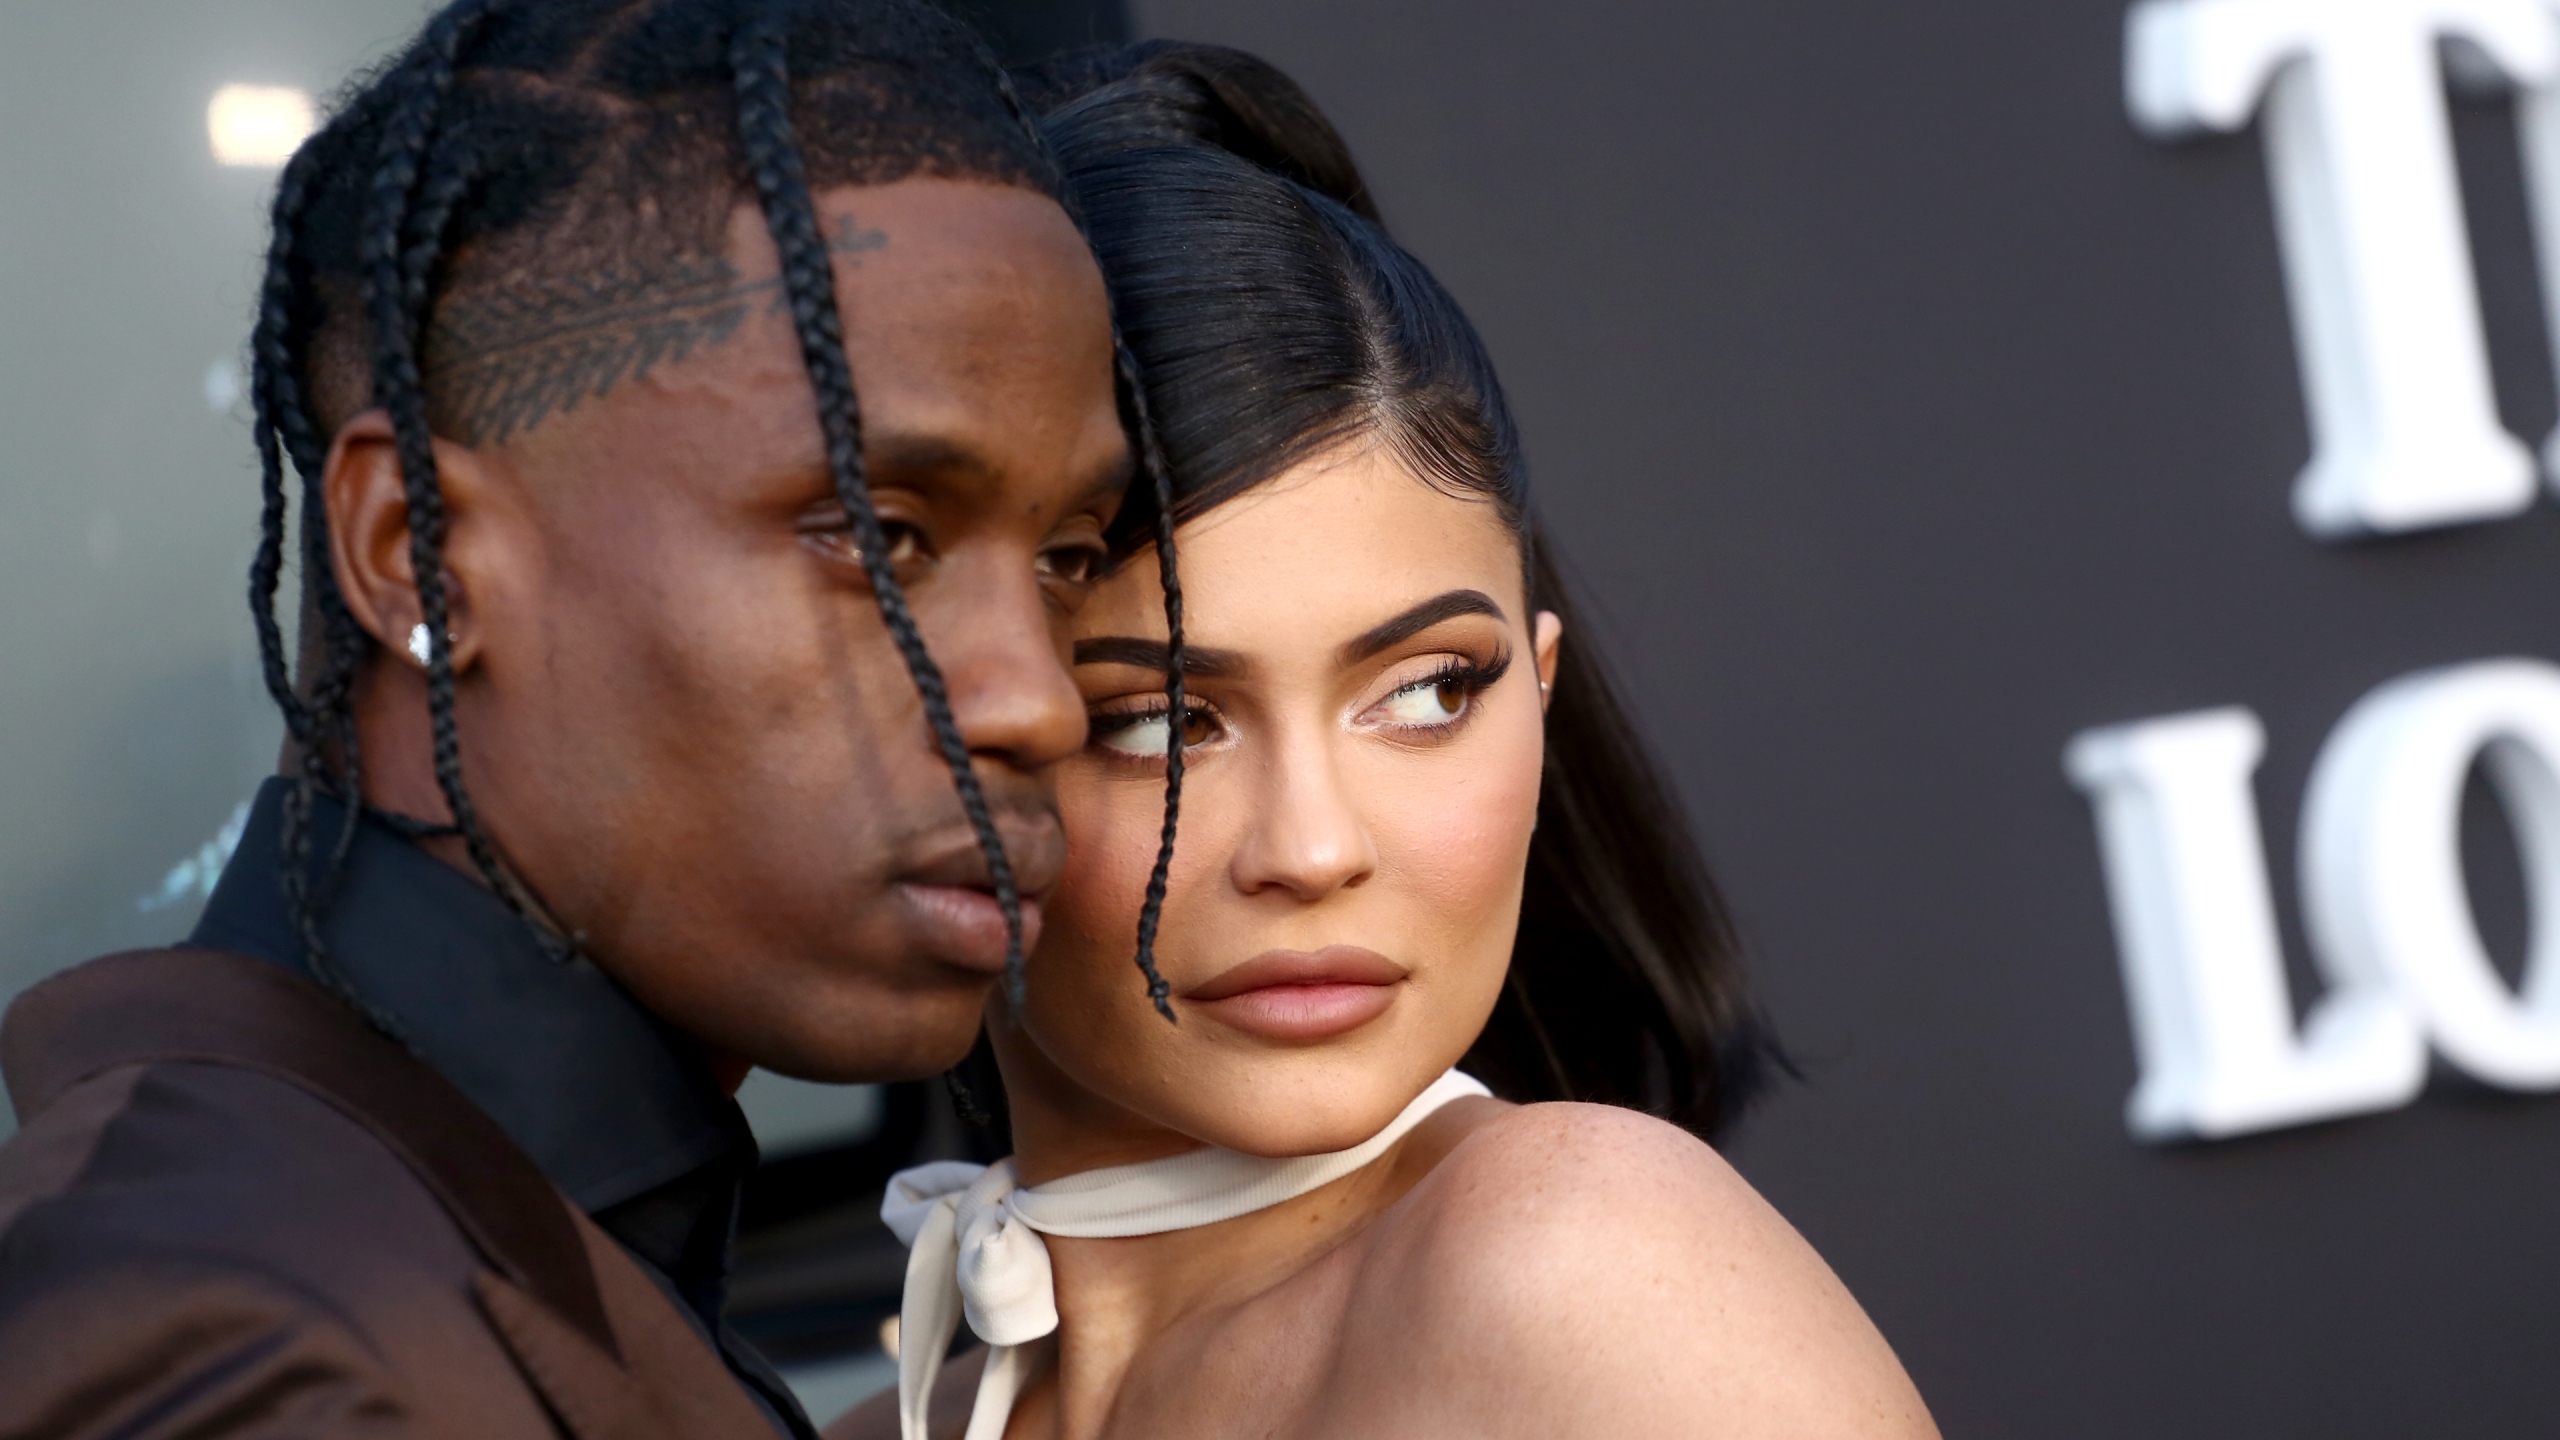 Kylie Jenner 2019 Wallpapers